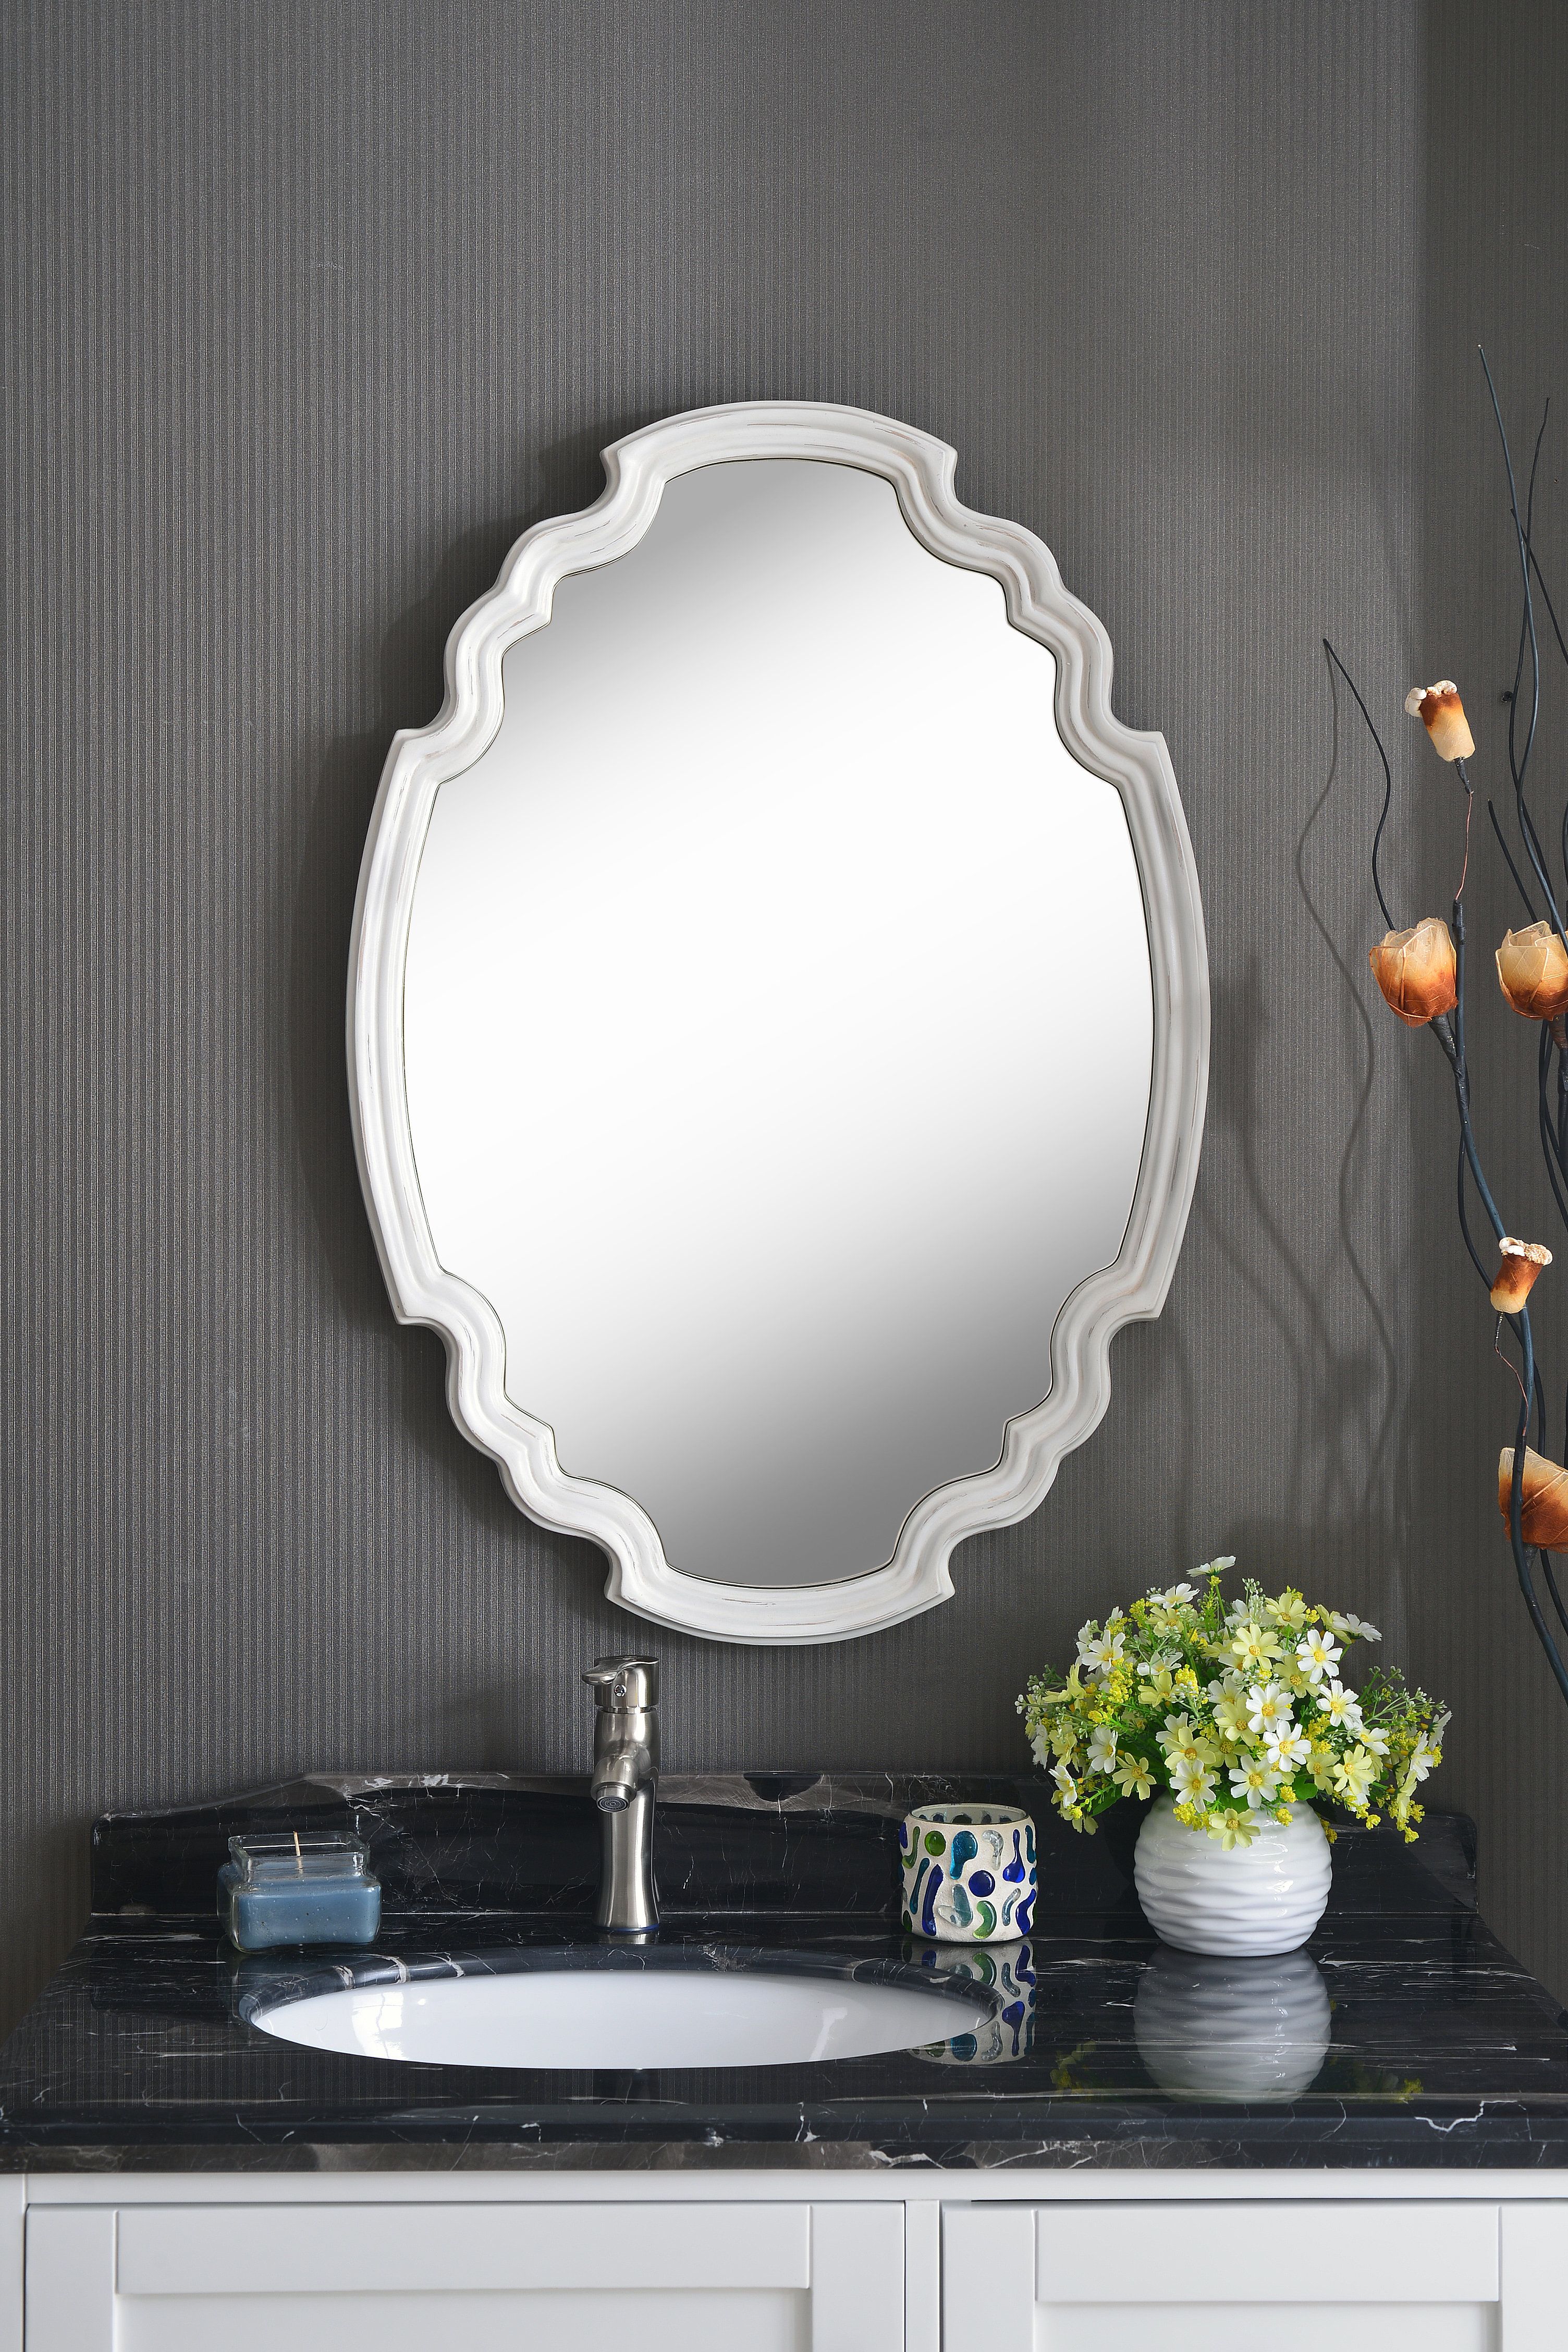 Broadmeadow Glam Accent Wall Mirror Intended For Broadmeadow Glam Accent Wall Mirrors (View 4 of 20)